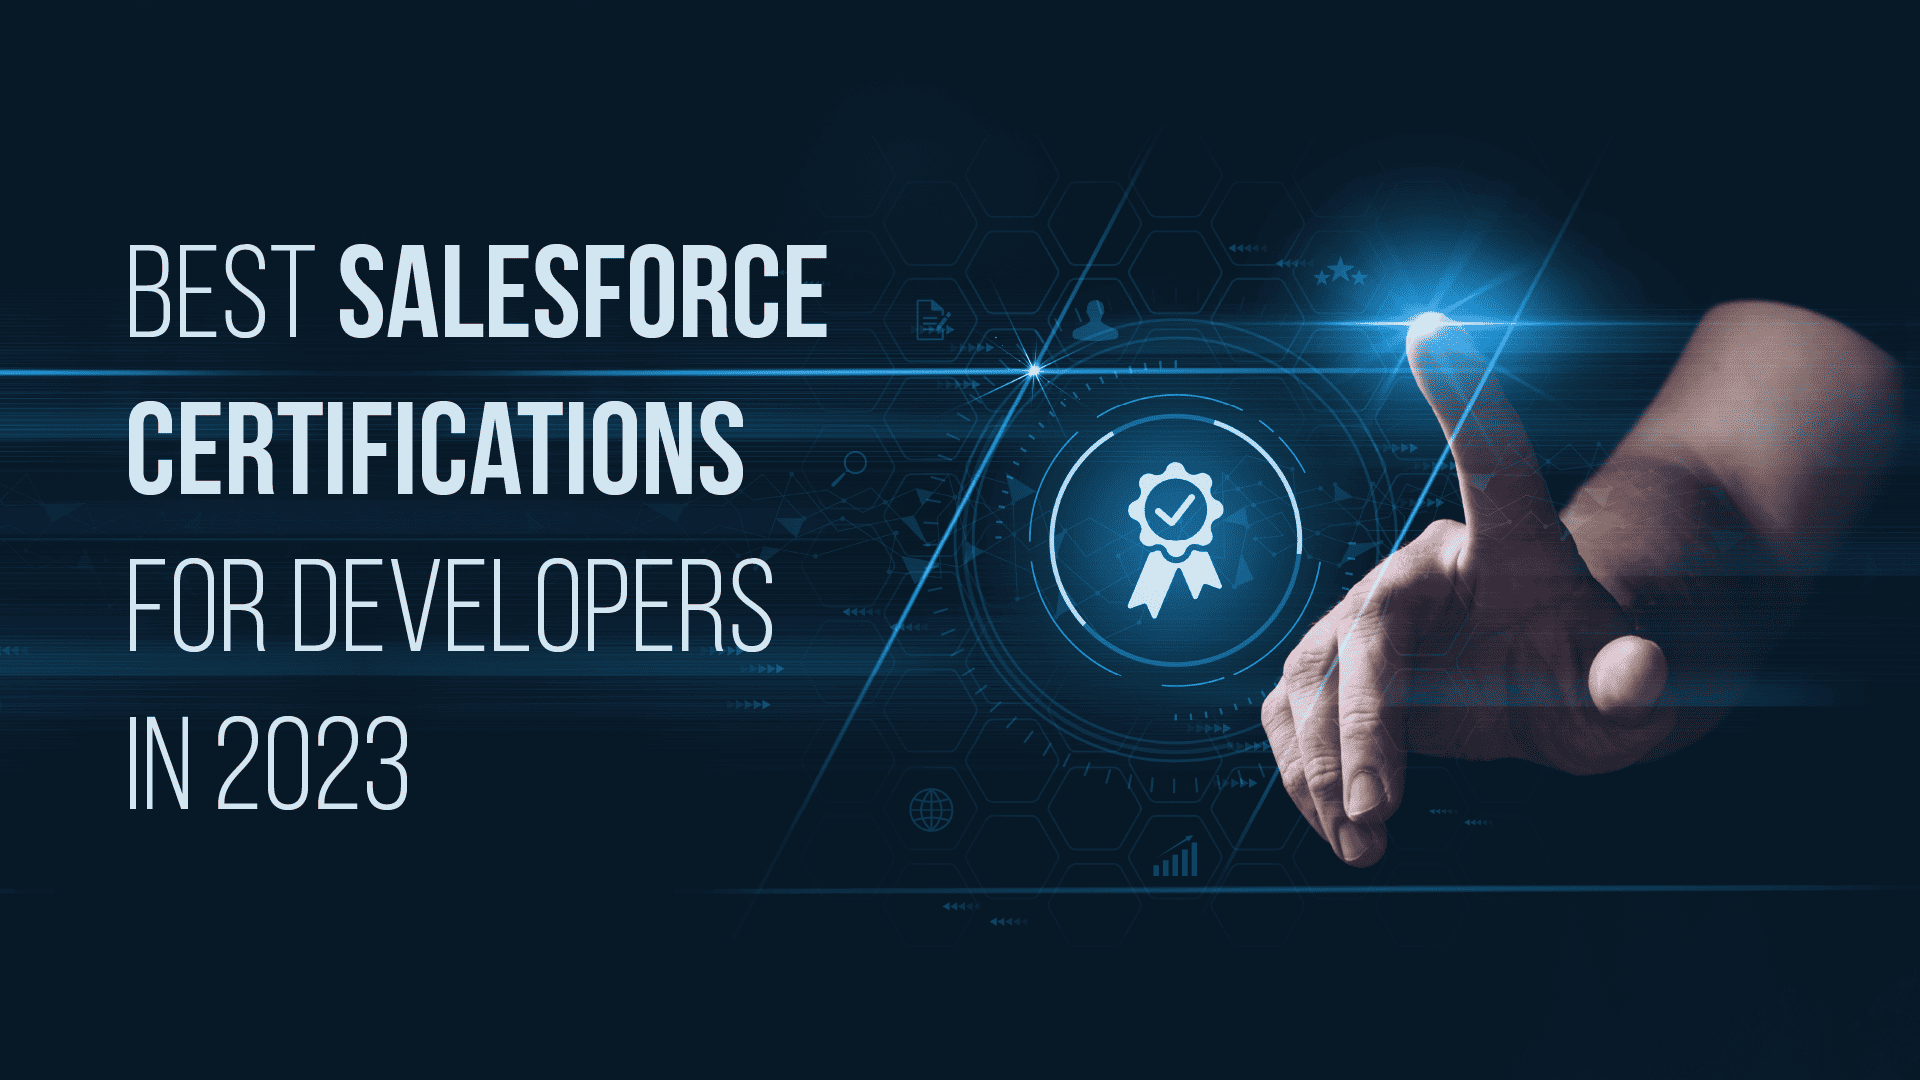 Best Salesforce Certifications for Developers in 2023